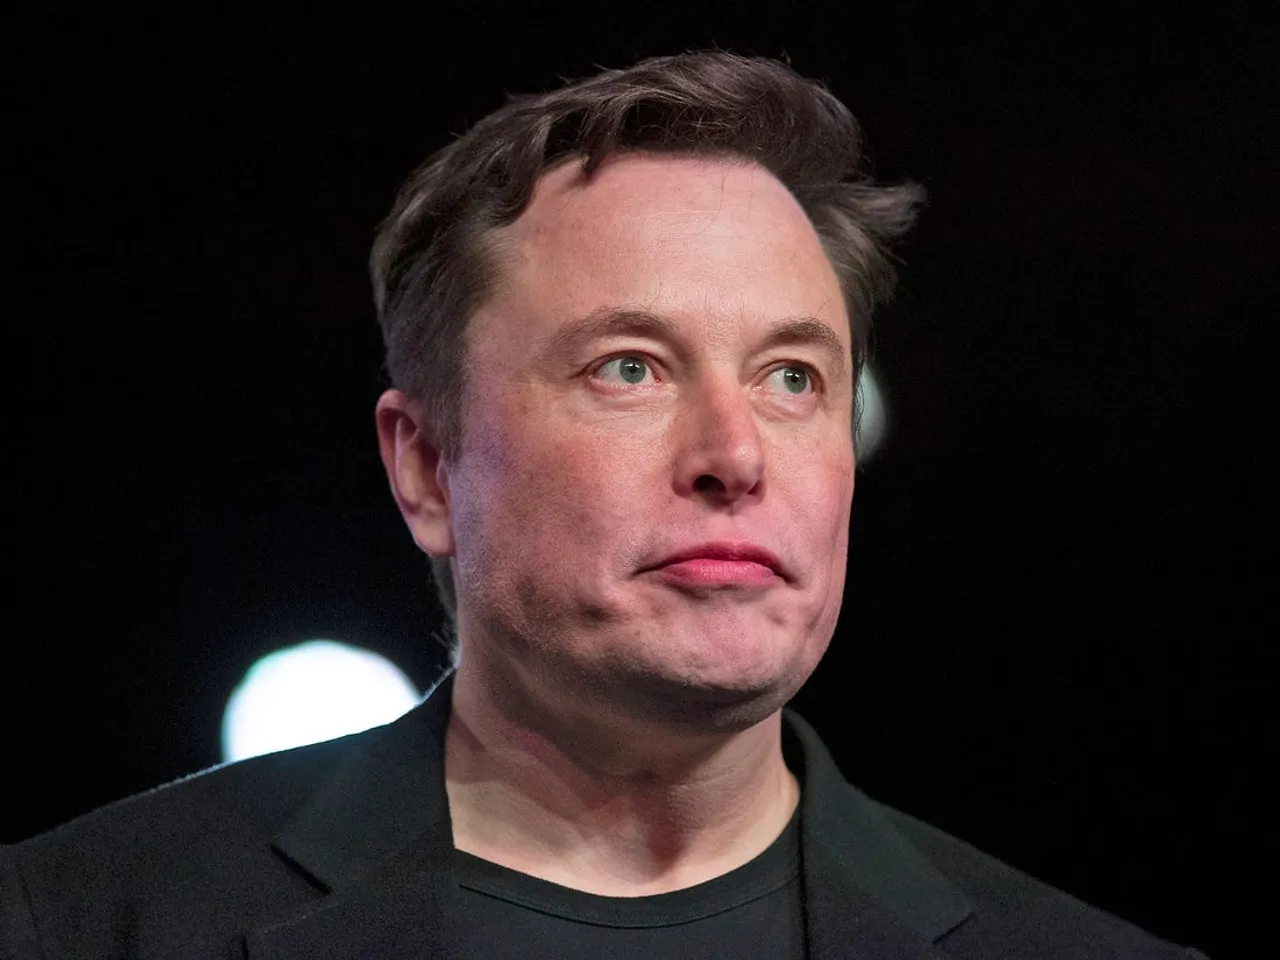 Elon Musk Takes Charge of Twitter And CEO Parag Agarwal Resigns